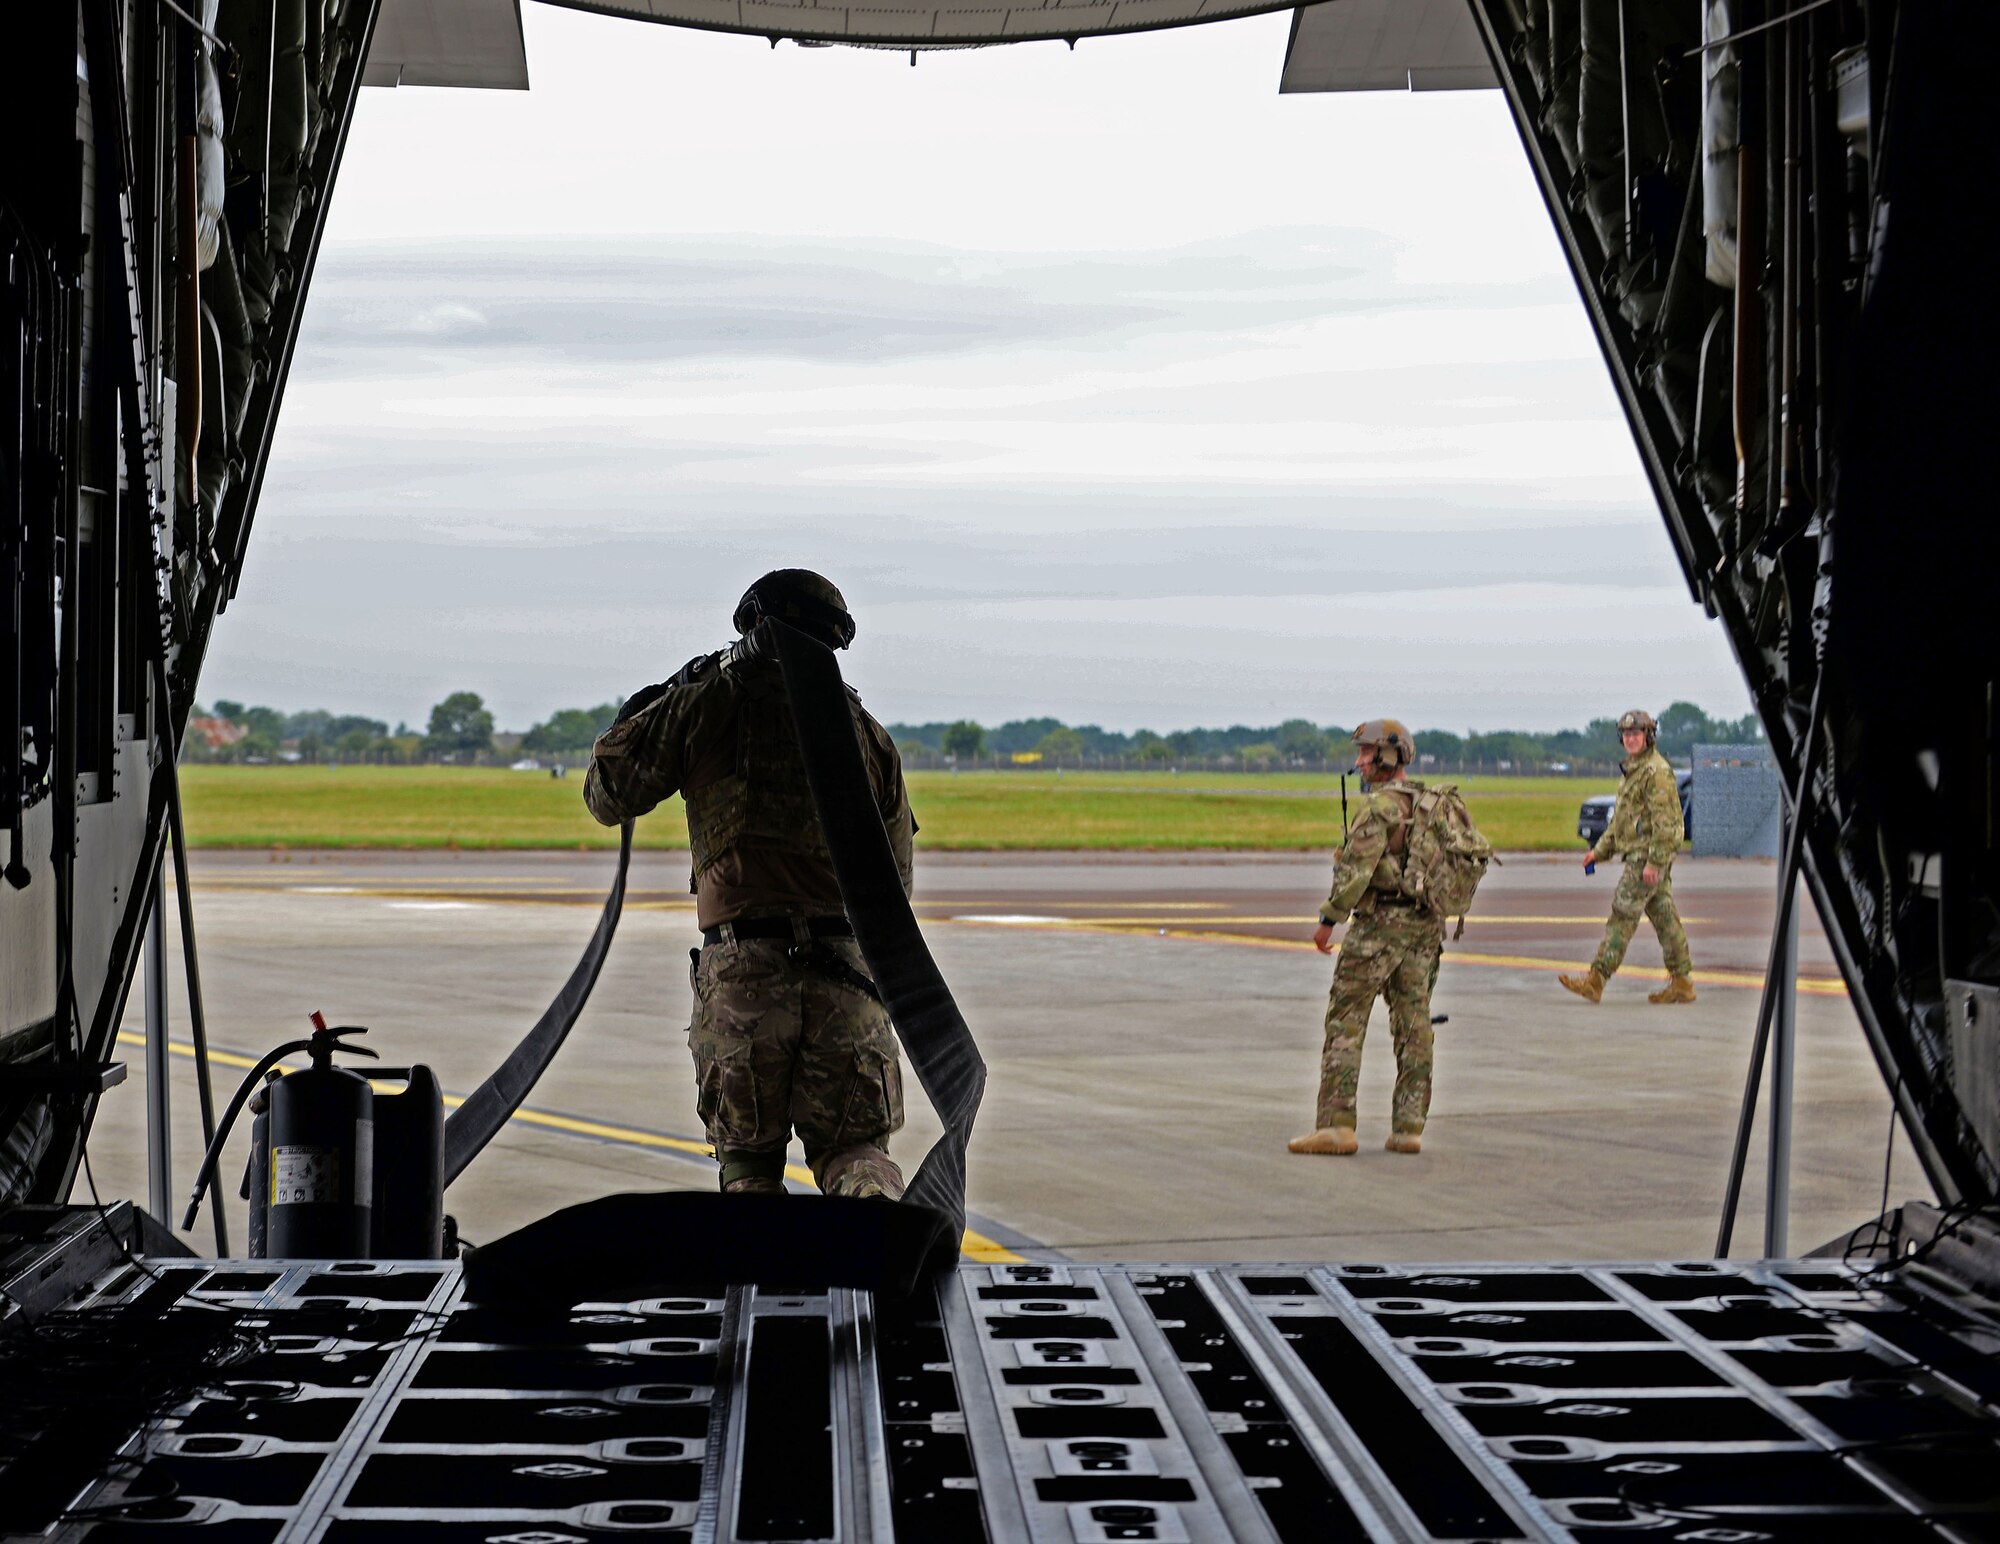 U.S. Air Force Airman 1st Class Michael Ricci, 100th Logistics Readiness Squadron forward arming and refueling point, or FARP, technician carries out one of the 100 foot hoses used to refuel four F-15C Eagles, from RAF Lakenheath, during a FARP exercise July 26, 2017, on RAF Mildenhall, England.  A FARP is an austere location near a combat zone where fuel and supplies can be transferred from one aircraft to another. (U.S. Air Force photo by Airman 1st Class Luke Milano)